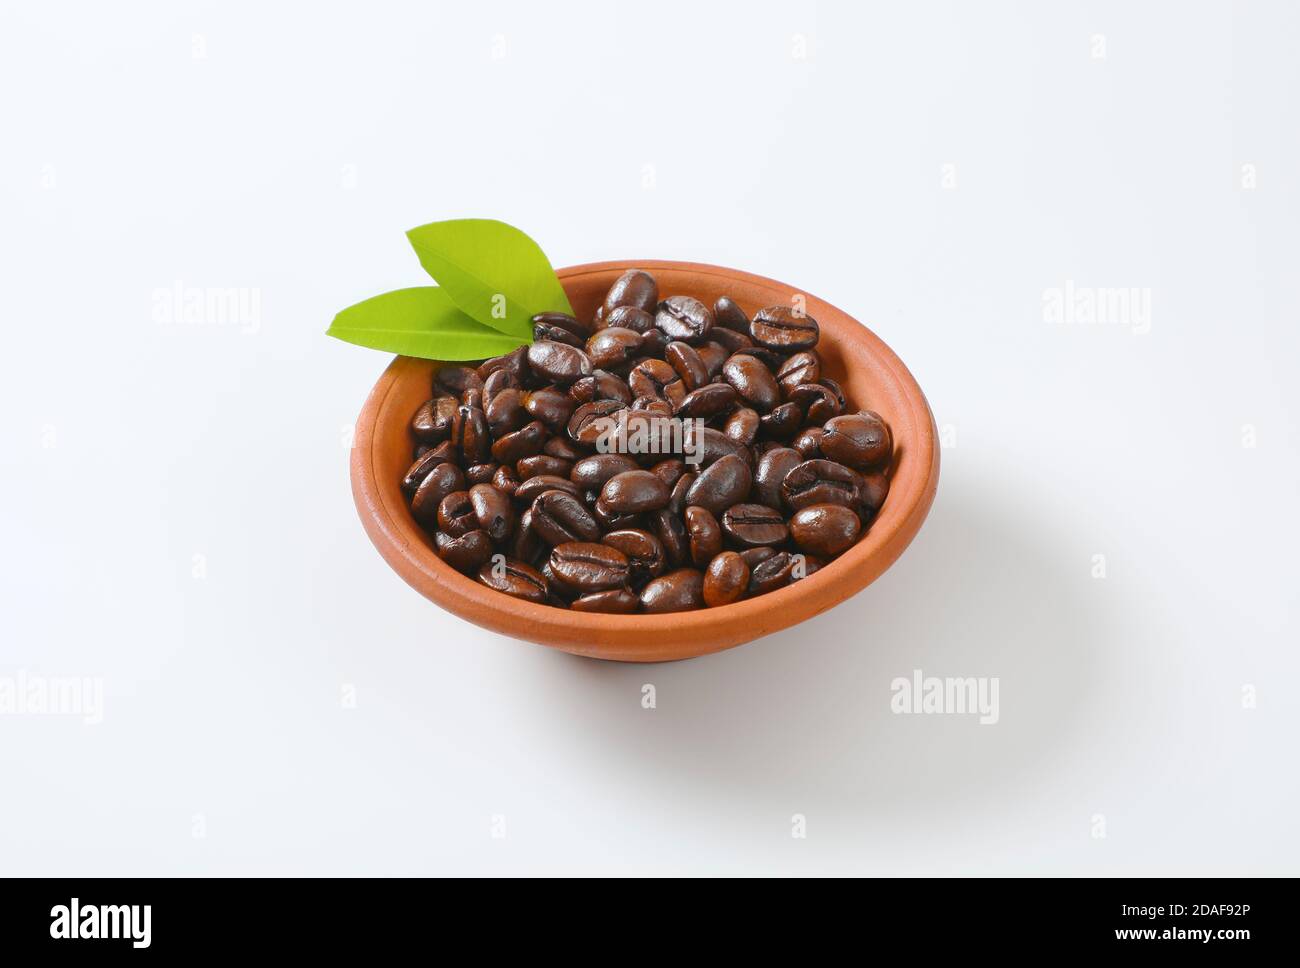 Roasted coffee beans in terracotta bowl Stock Photo